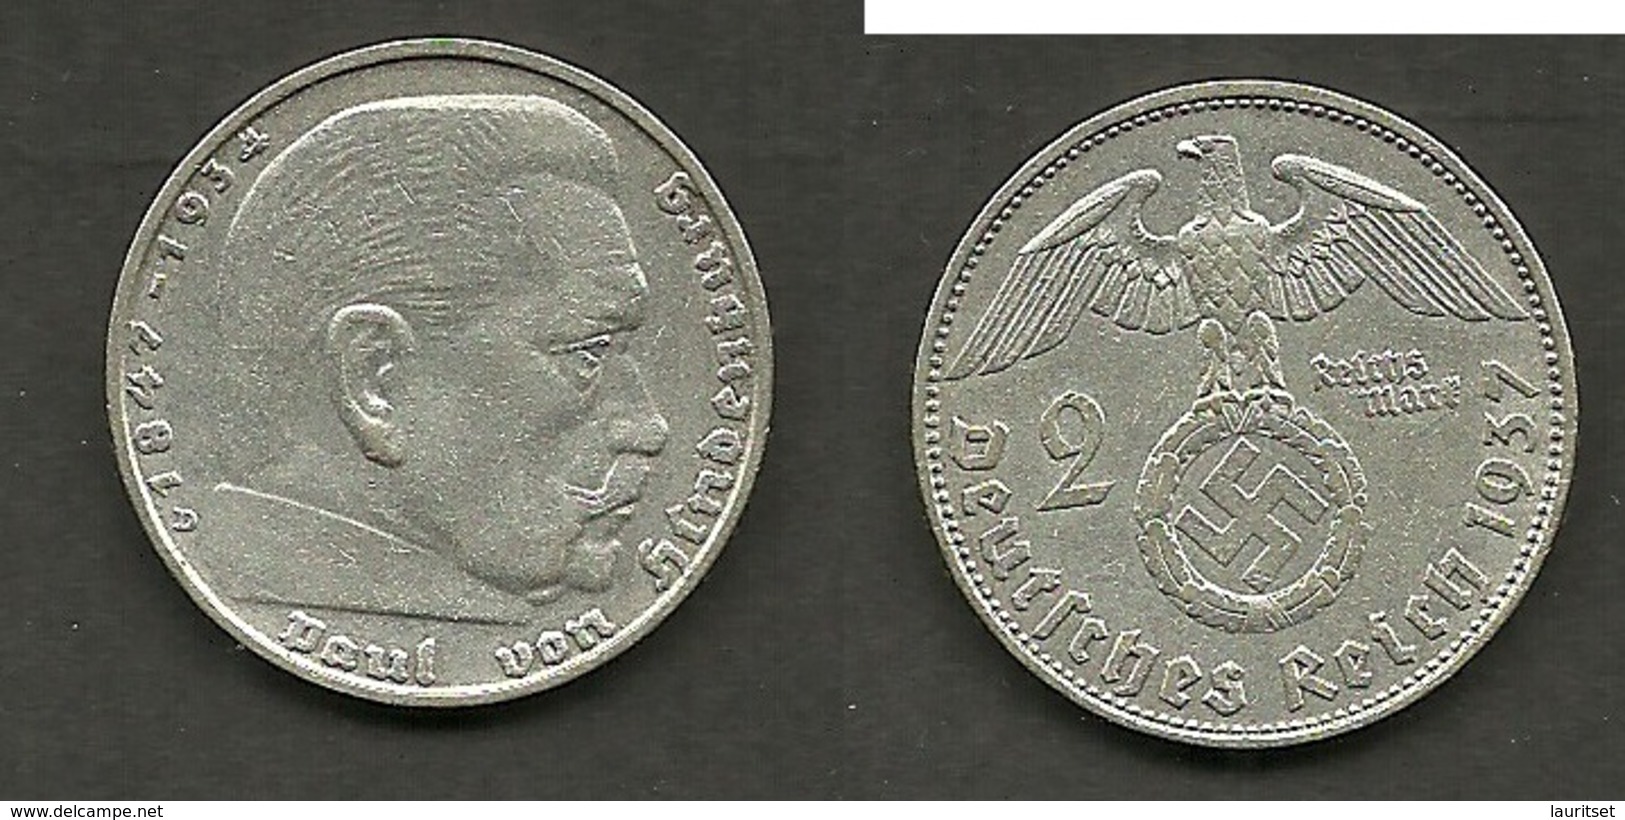 Germany 1937 Silver Coin 2 RM - 2 Reichsmark